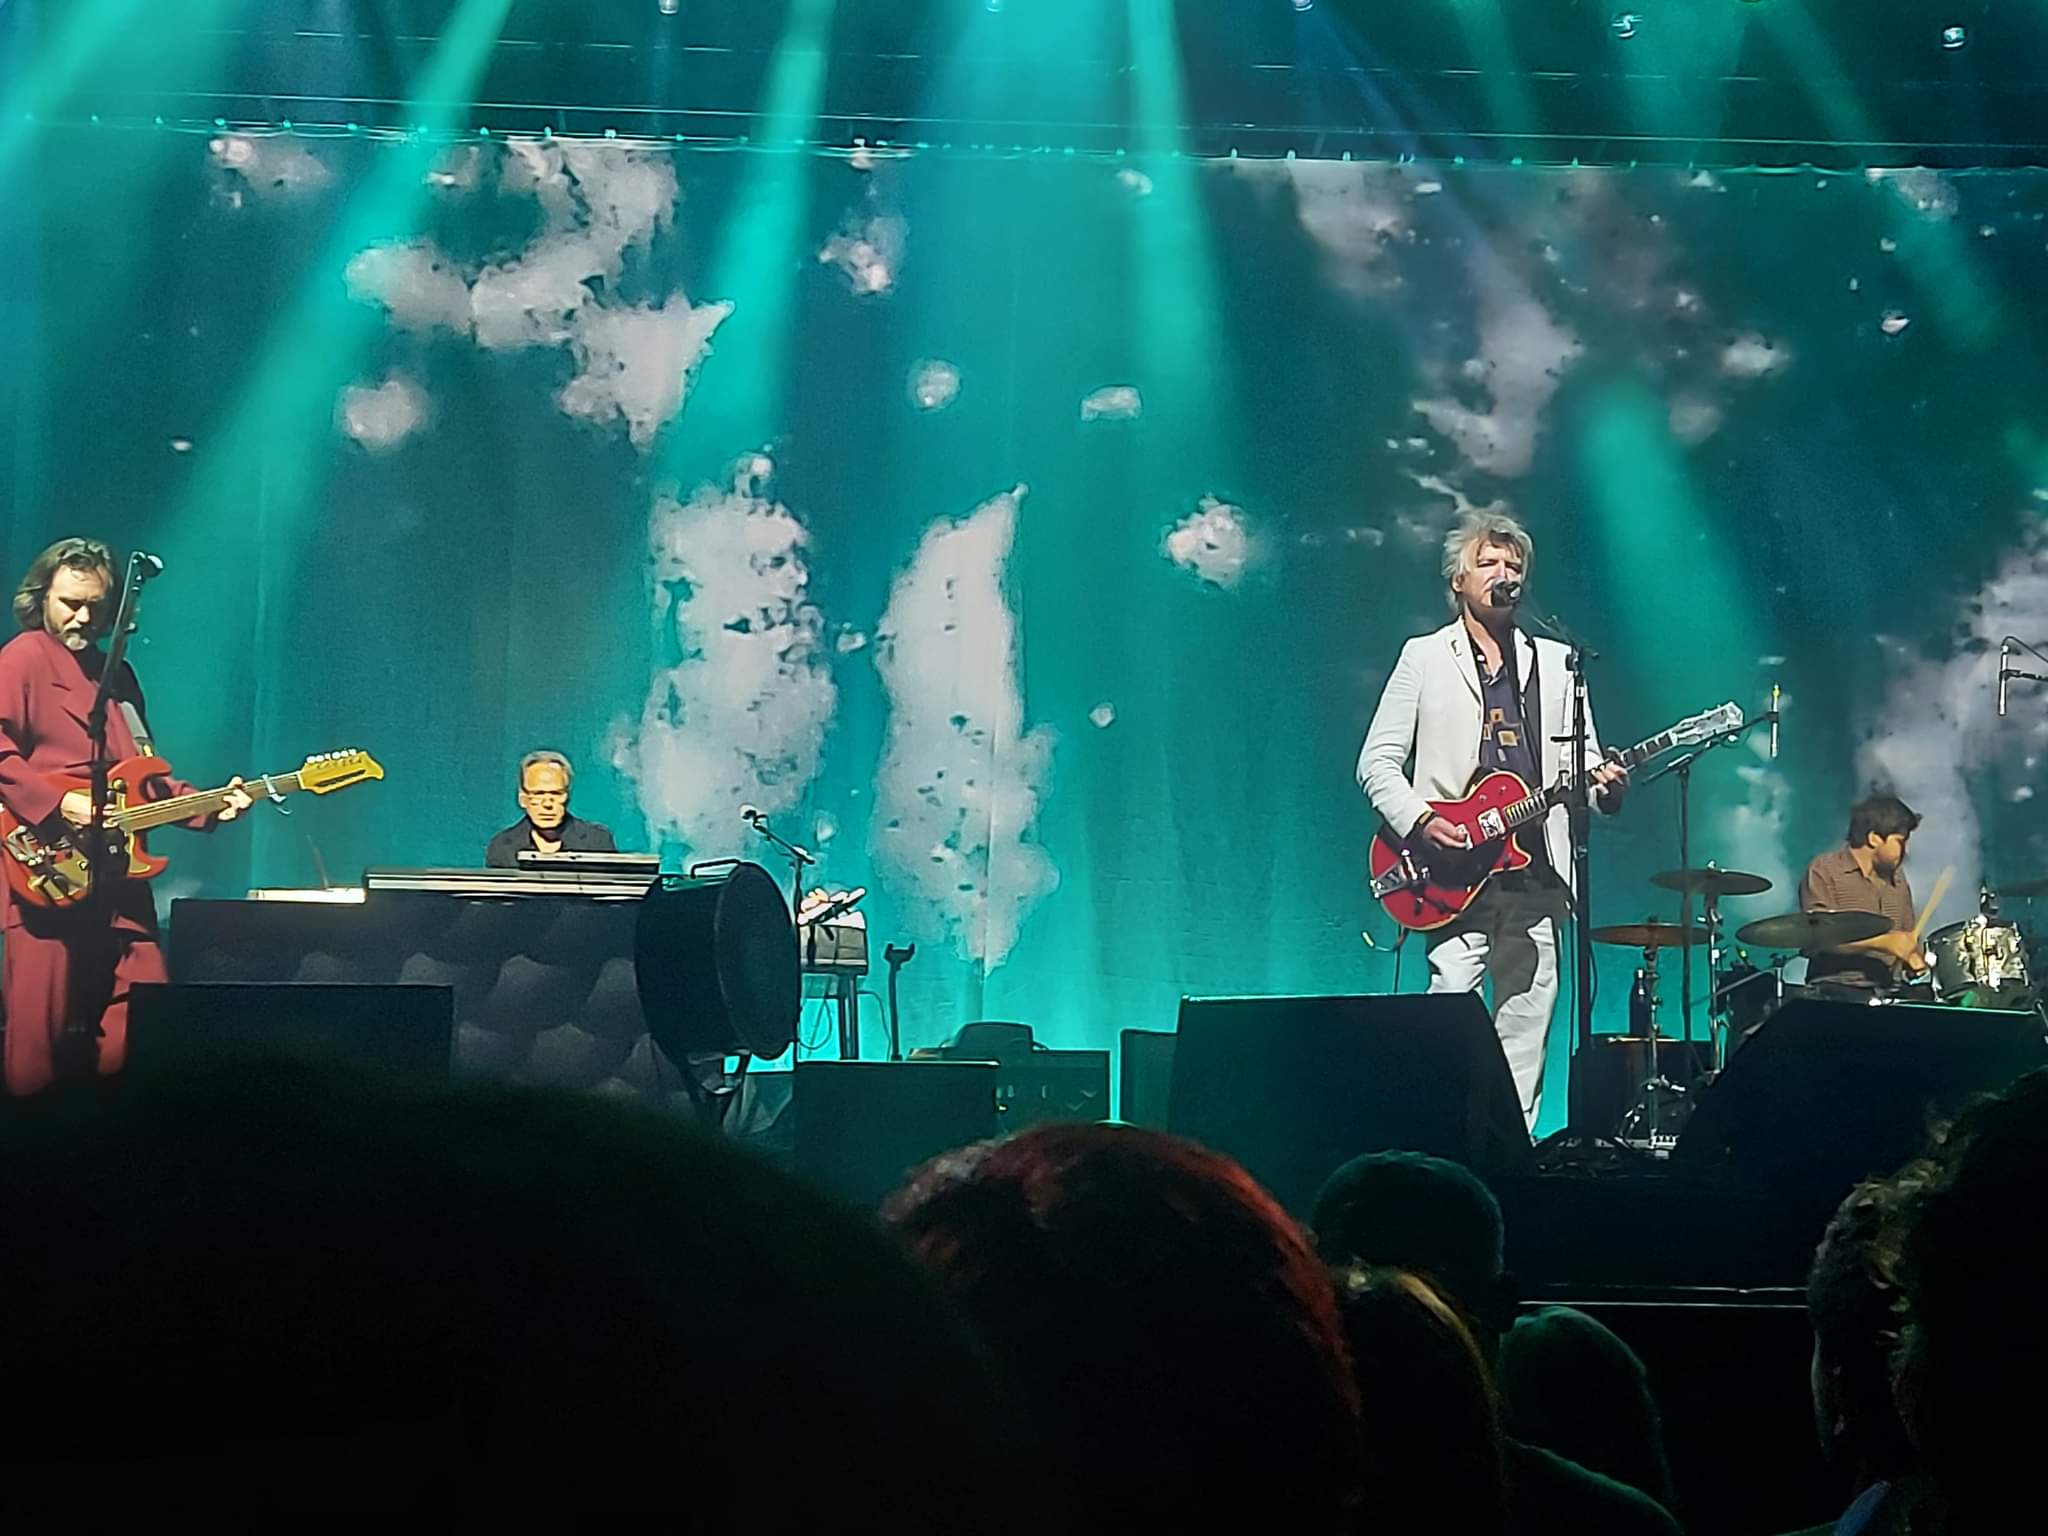 LIVE: Crowded House Arena, Cardiff 13 06 2022 Is In The TV